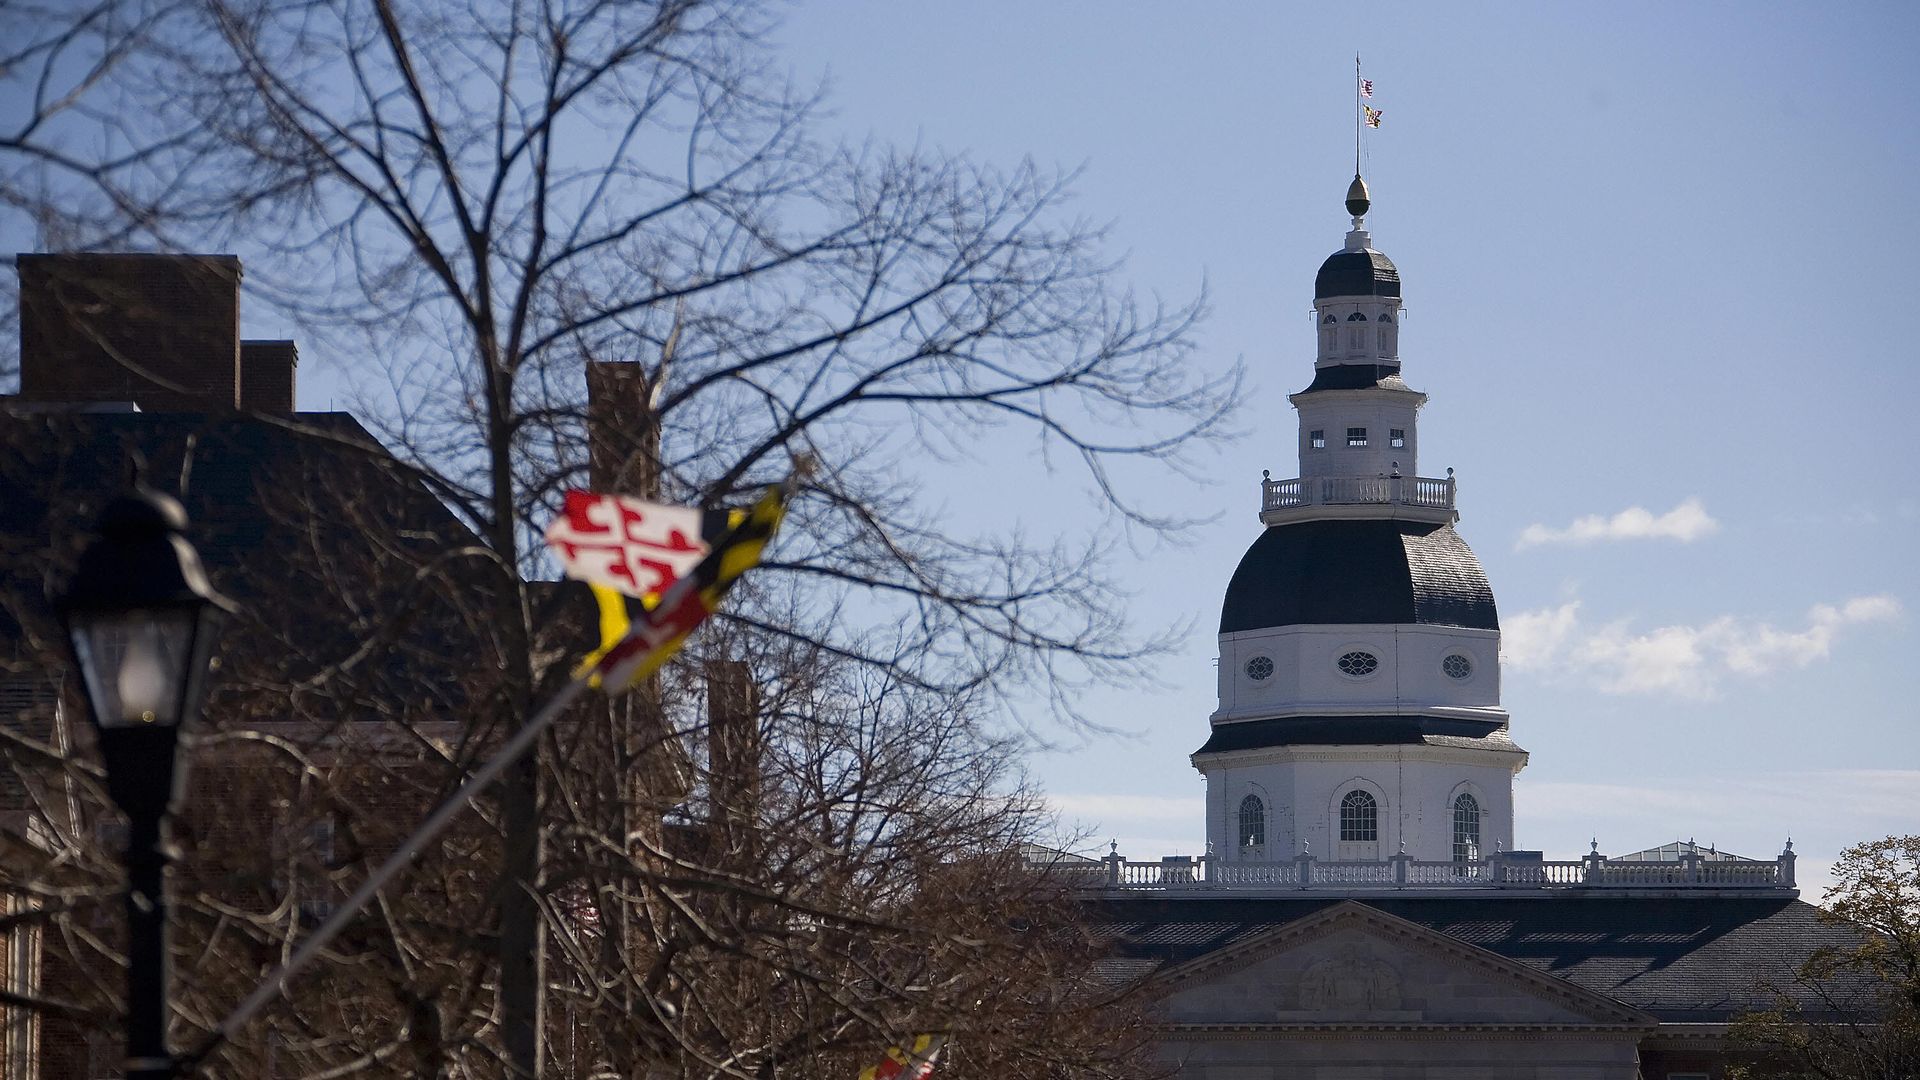 The Maryland State Capitol Building is seen in Annapolis 23 November 2007 33 miles (53kms) east of Washington, DC. 